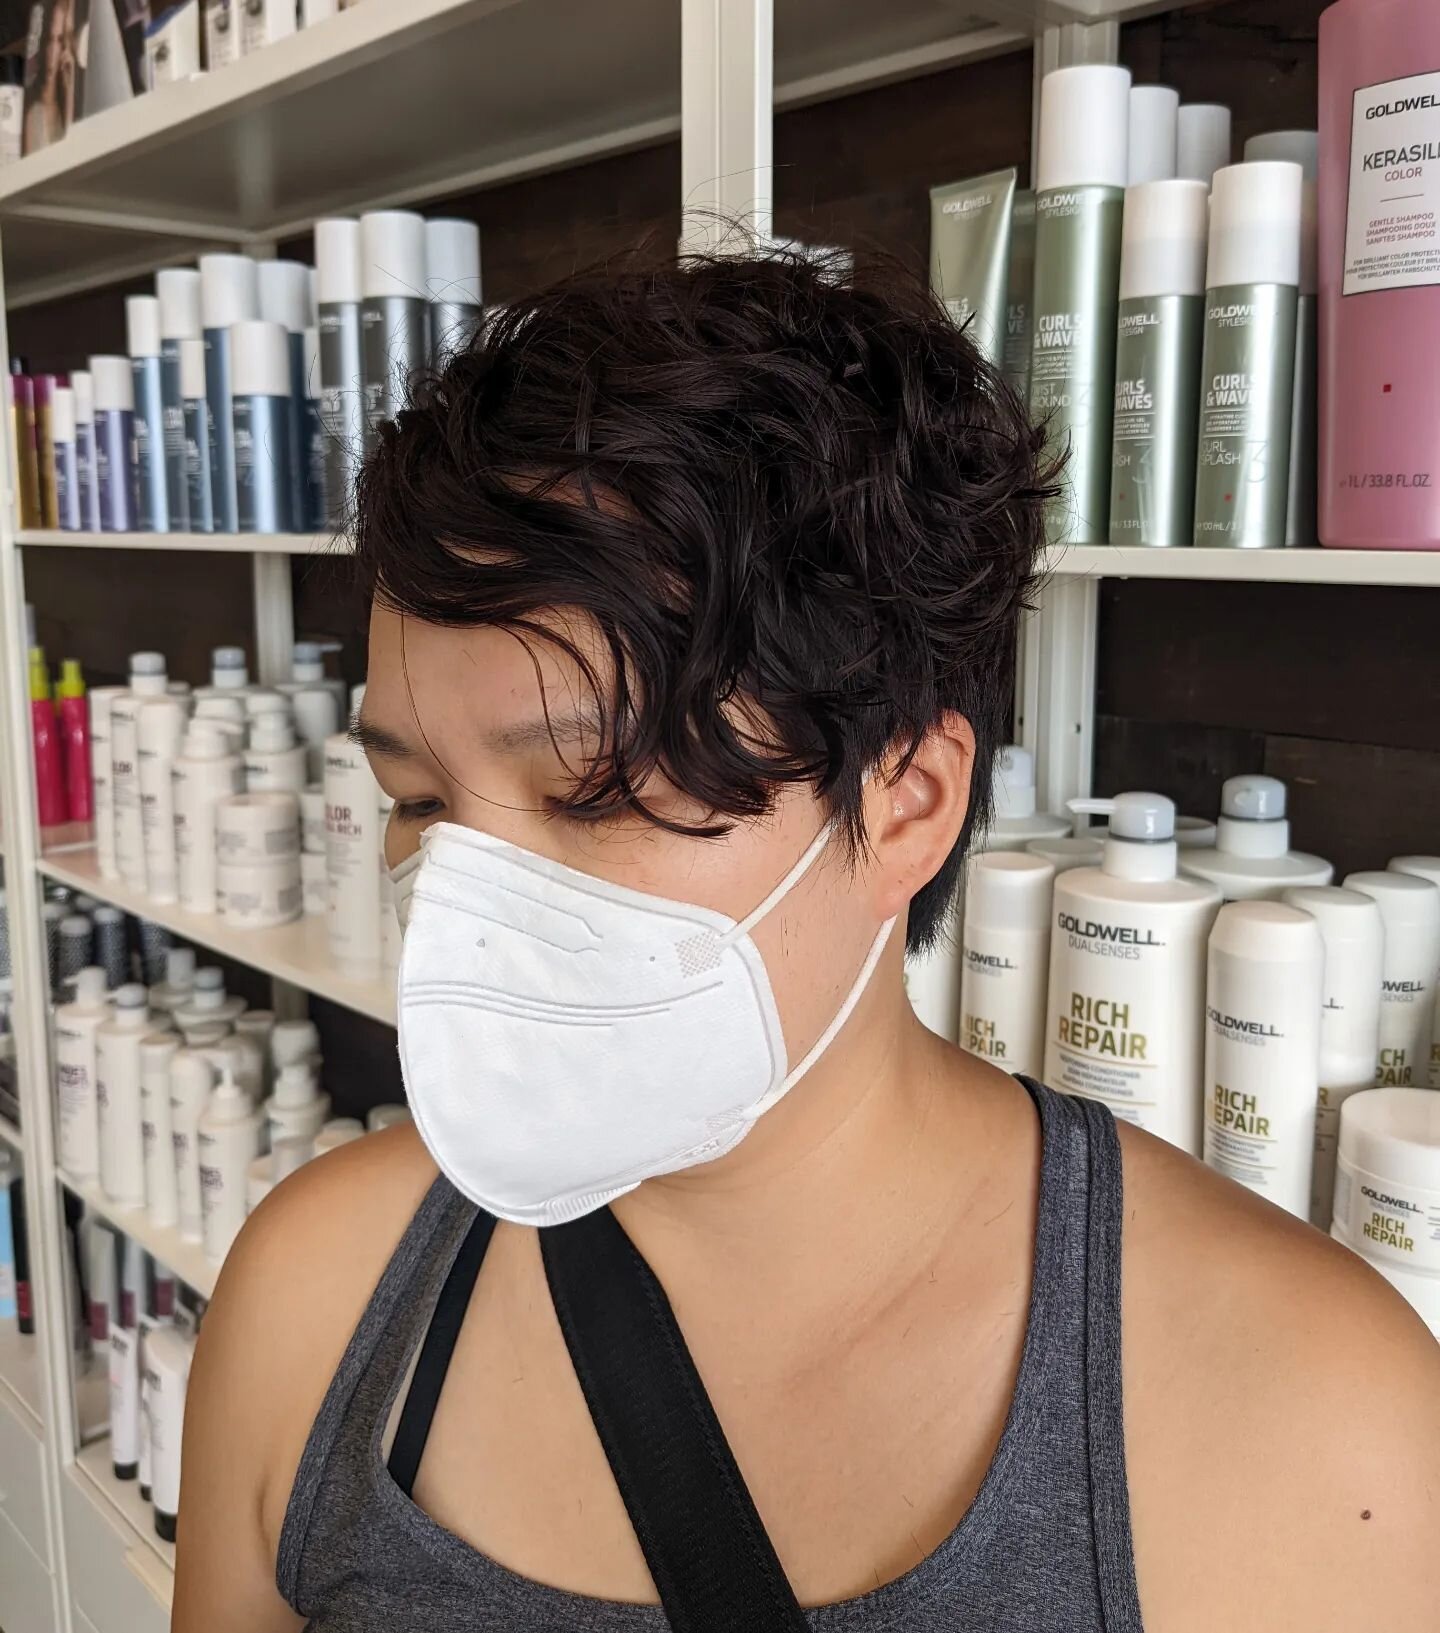 A perm and a pixie by Rosemary!
Rosemary has been a great new addition to the team! You can call or visit our website to book your next visit with her! 
.
.
.
#pixiecut #pixiehaircut #perm #baltimorehair #baltimoresalon #baltimorehairstylist